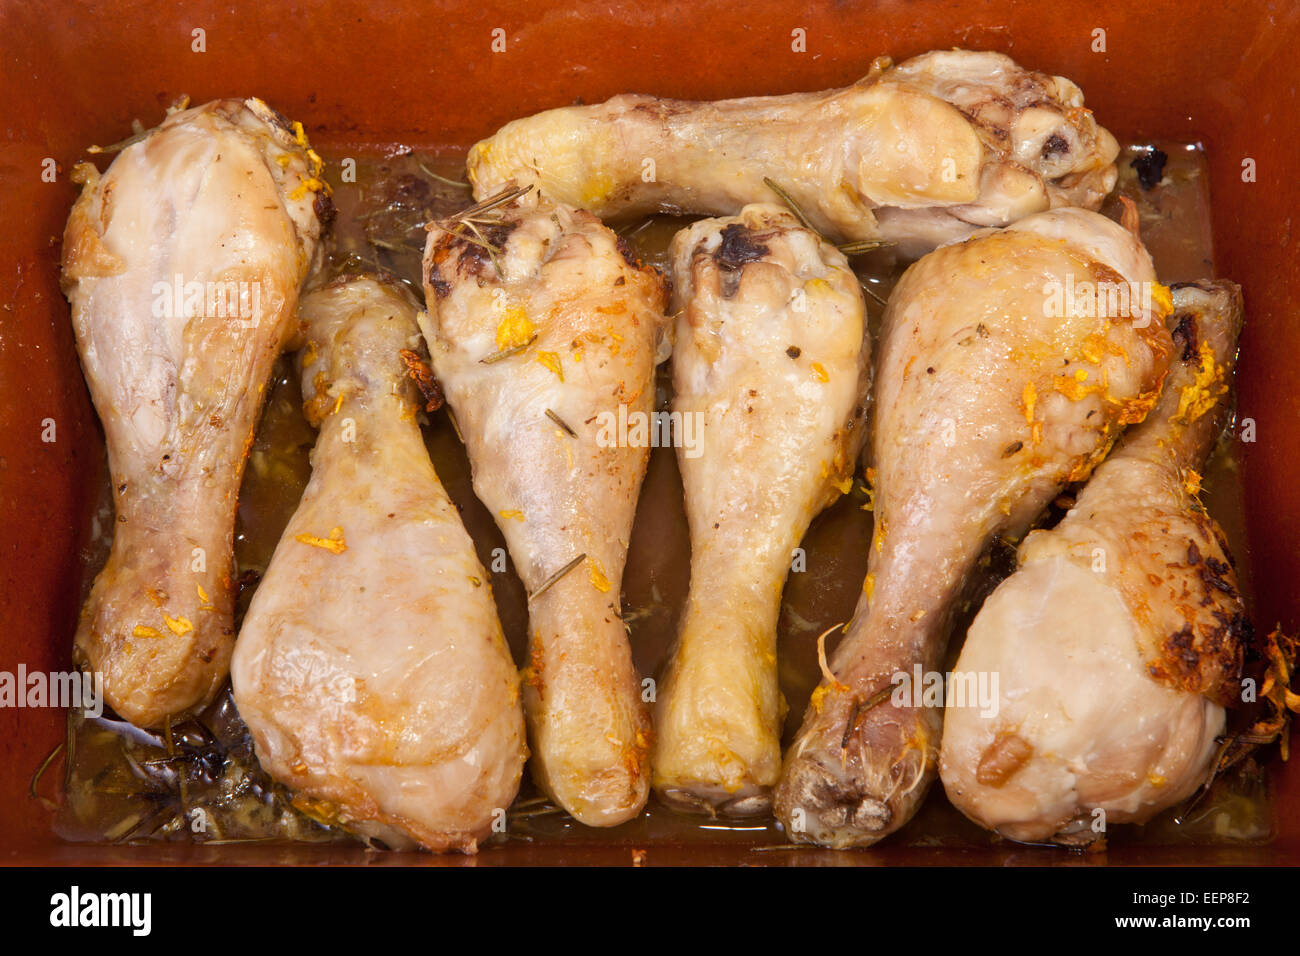 Oven-cooked chicken legs with herbs on a glazed clay pan Stock Photo